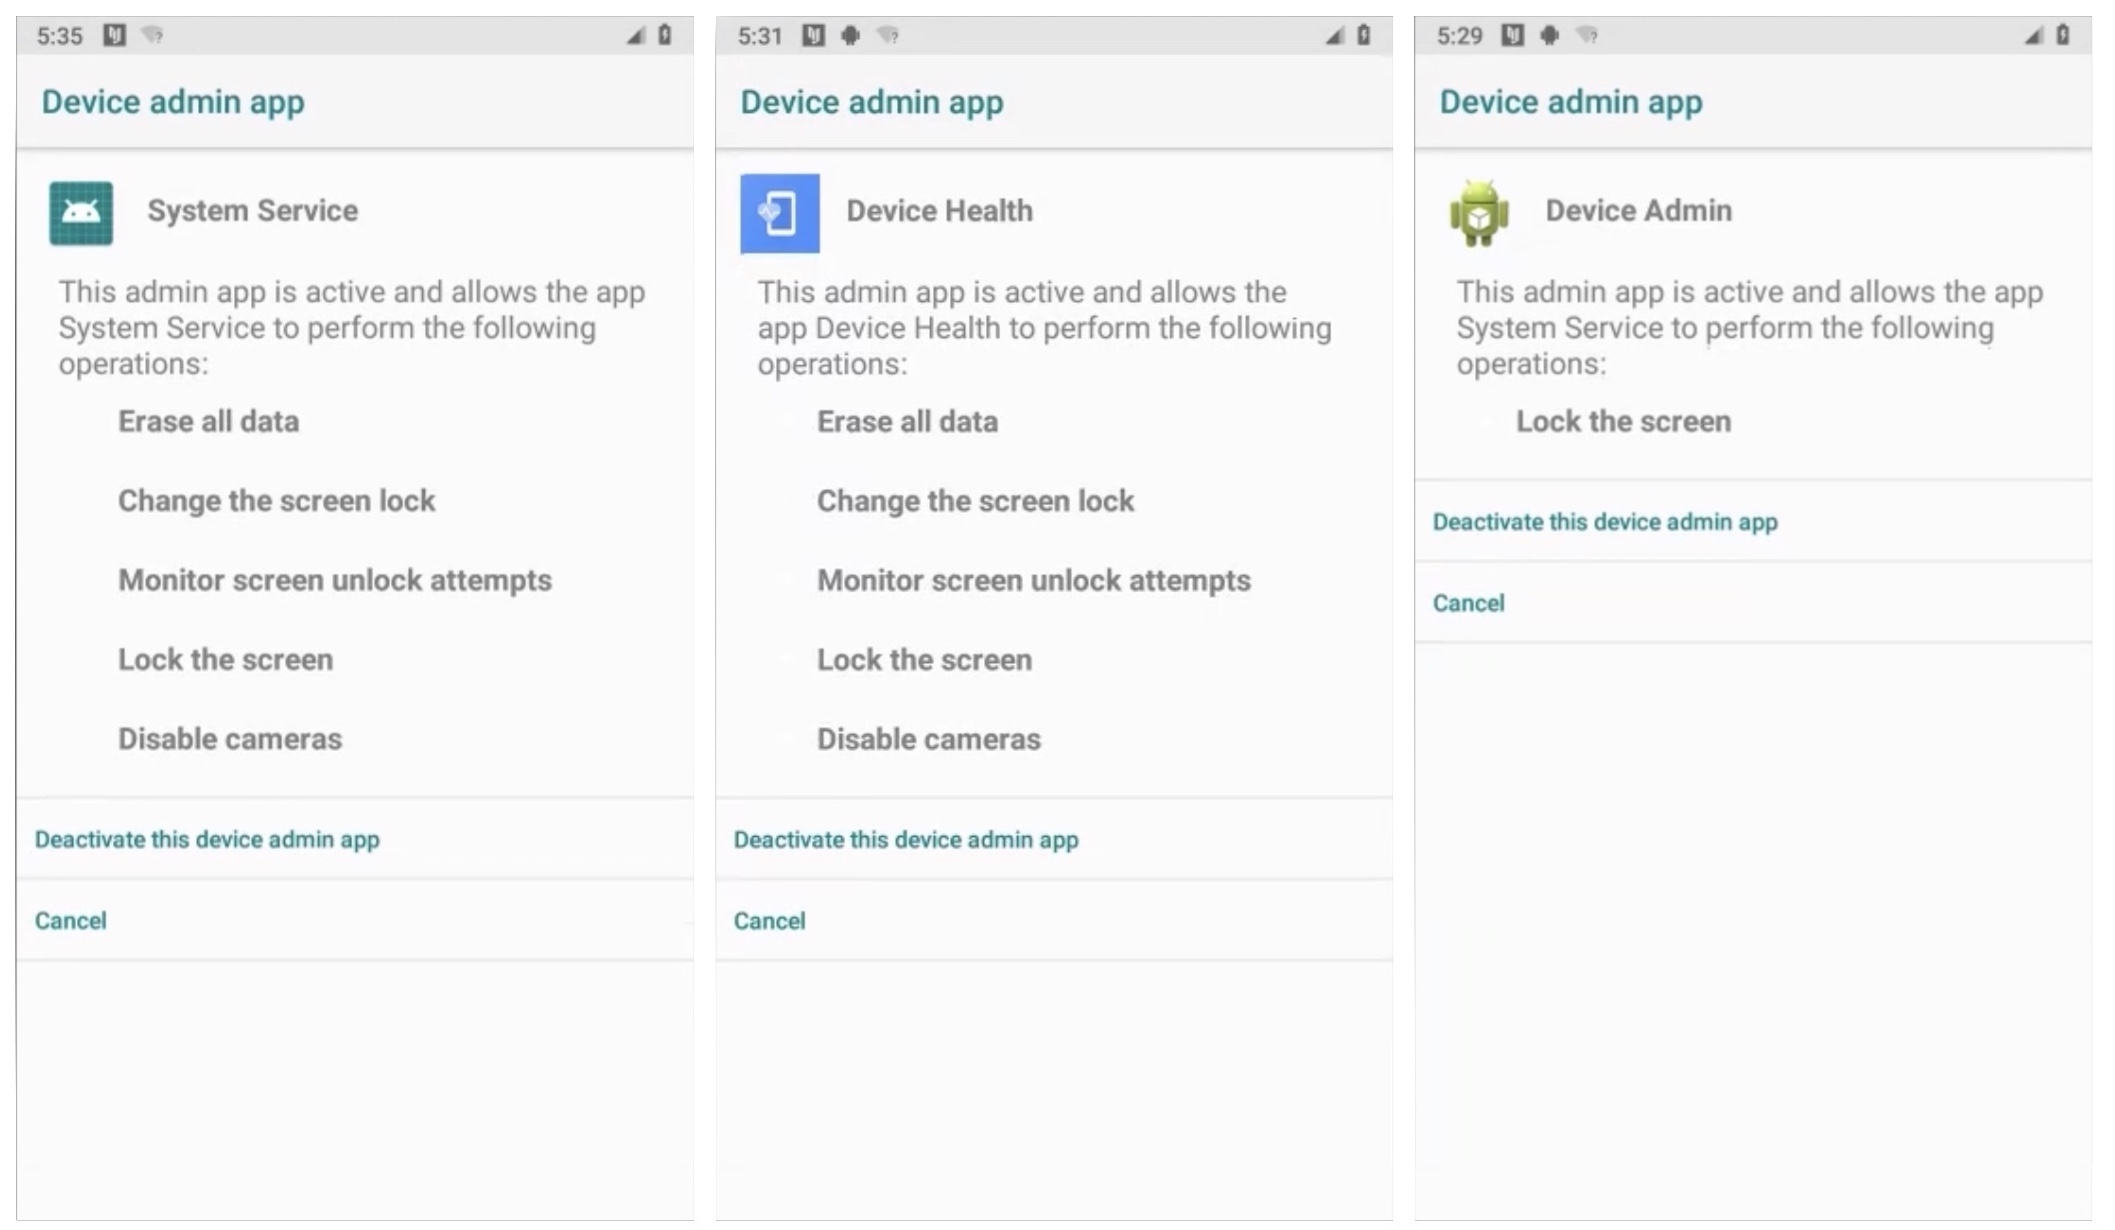 Screenshots showing the Android's device admin app panel.